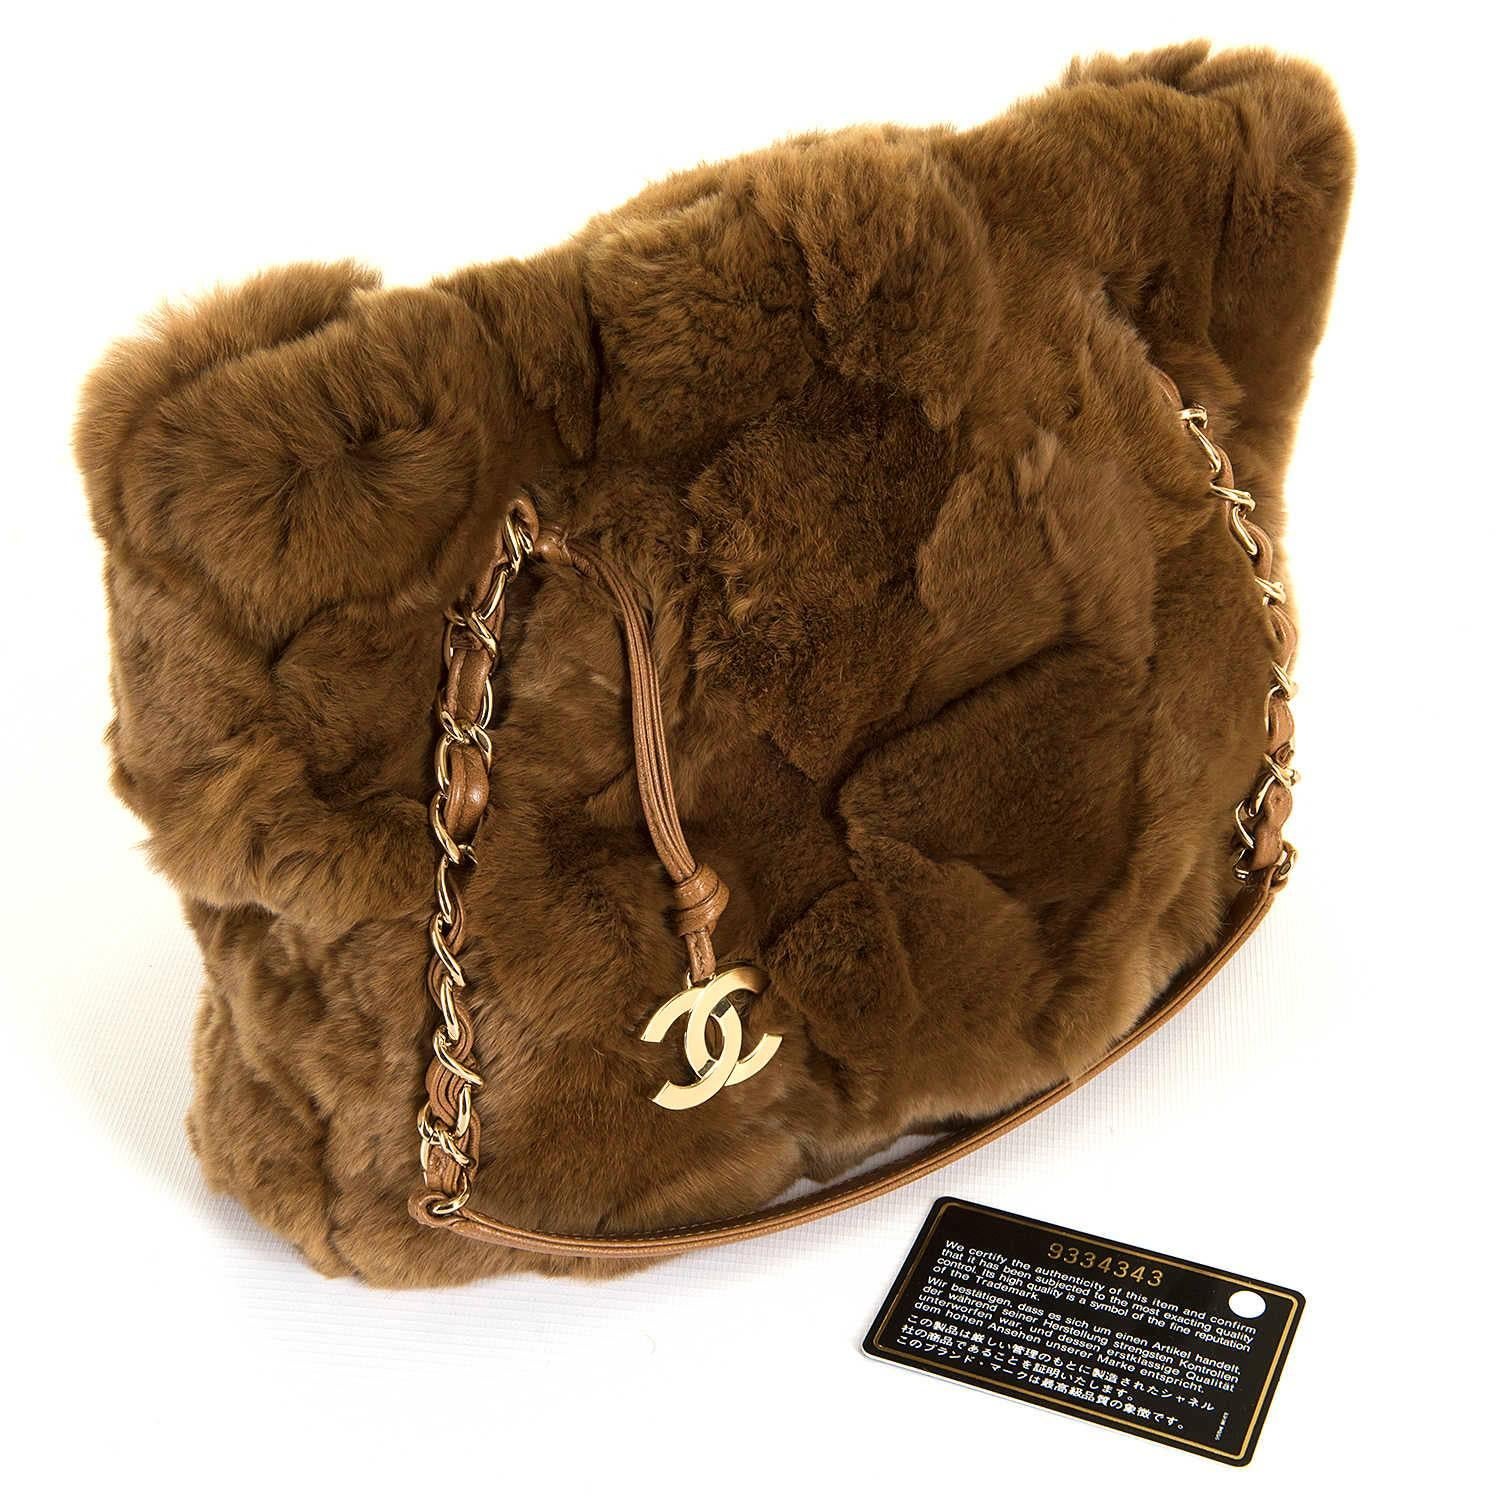 Women's RARE Chanel Jumbo Fur Shoulder Bag in 'Chataigne' with Camel Leather Trim